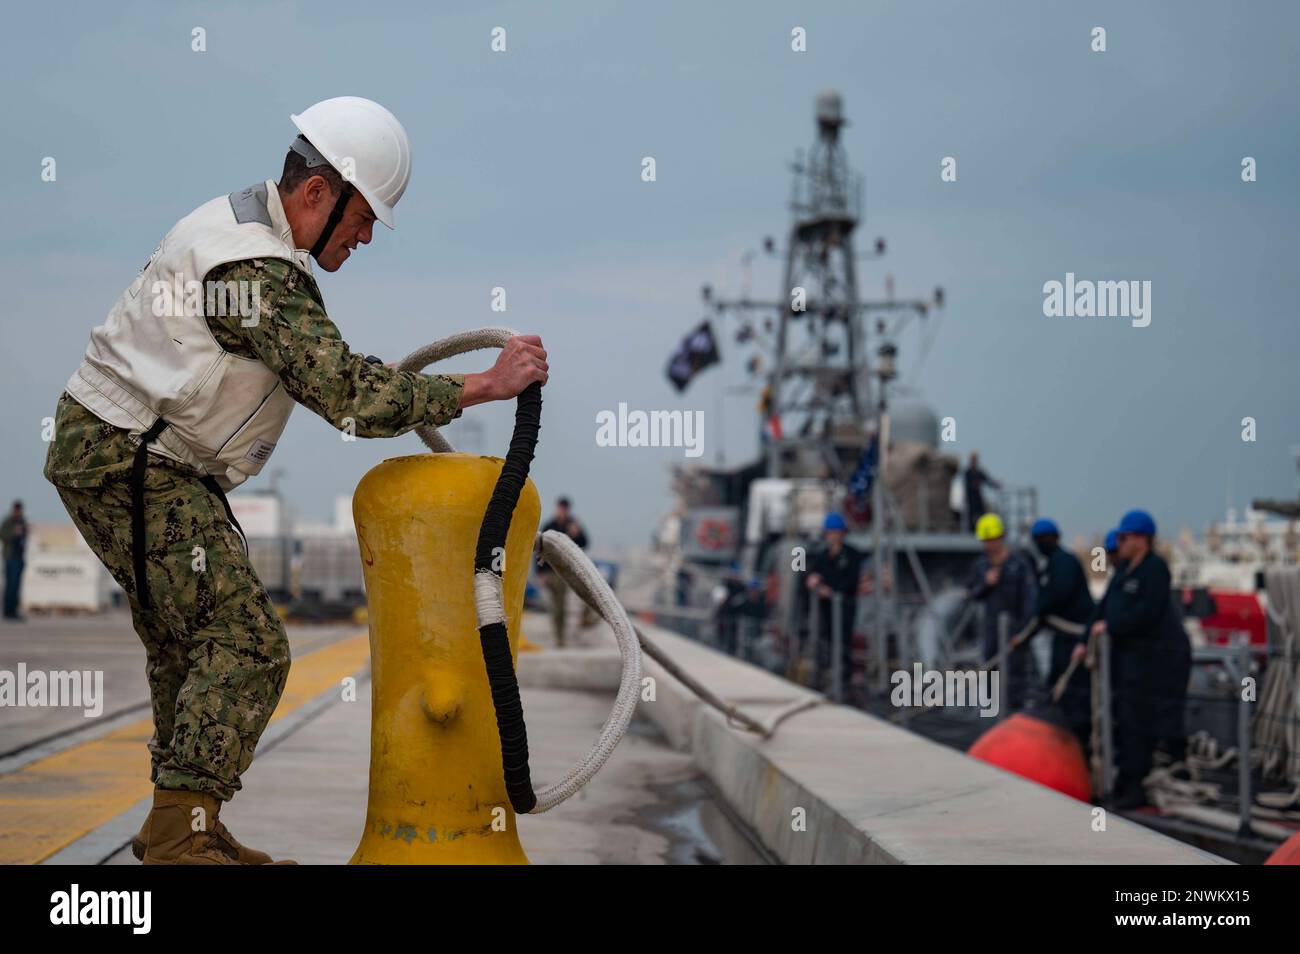 230114-N-EG592-1068 MANAMA, Bahrain (Jan. 14, 2023) Capt. Dave Coles, deputy commander, Destroyer Squadron Fifty, removes a line from a bollard as patrol coastal ship USS Sirocco (PC 6) departs Naval Support Activity Bahrain, Jan. 14. Sirocco is deployed to the U.S. 5th Fleet area of operations to help ensure maritime security and stability in the Middle East region. Stock Photo